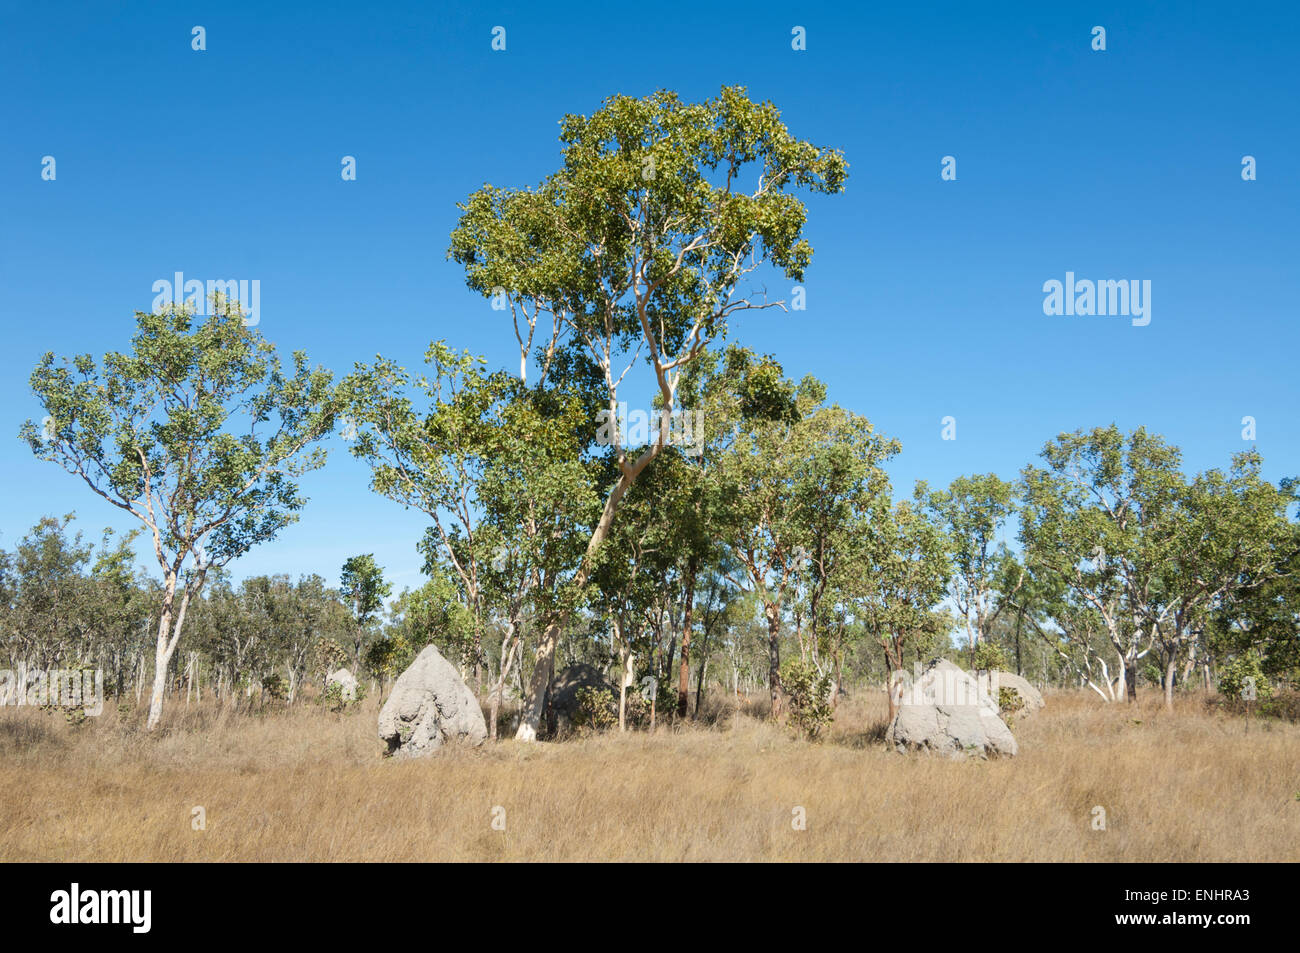 Termites Mounds in the Savannah, Charnley River Station, Kimberley, Western Australia Stock Photo